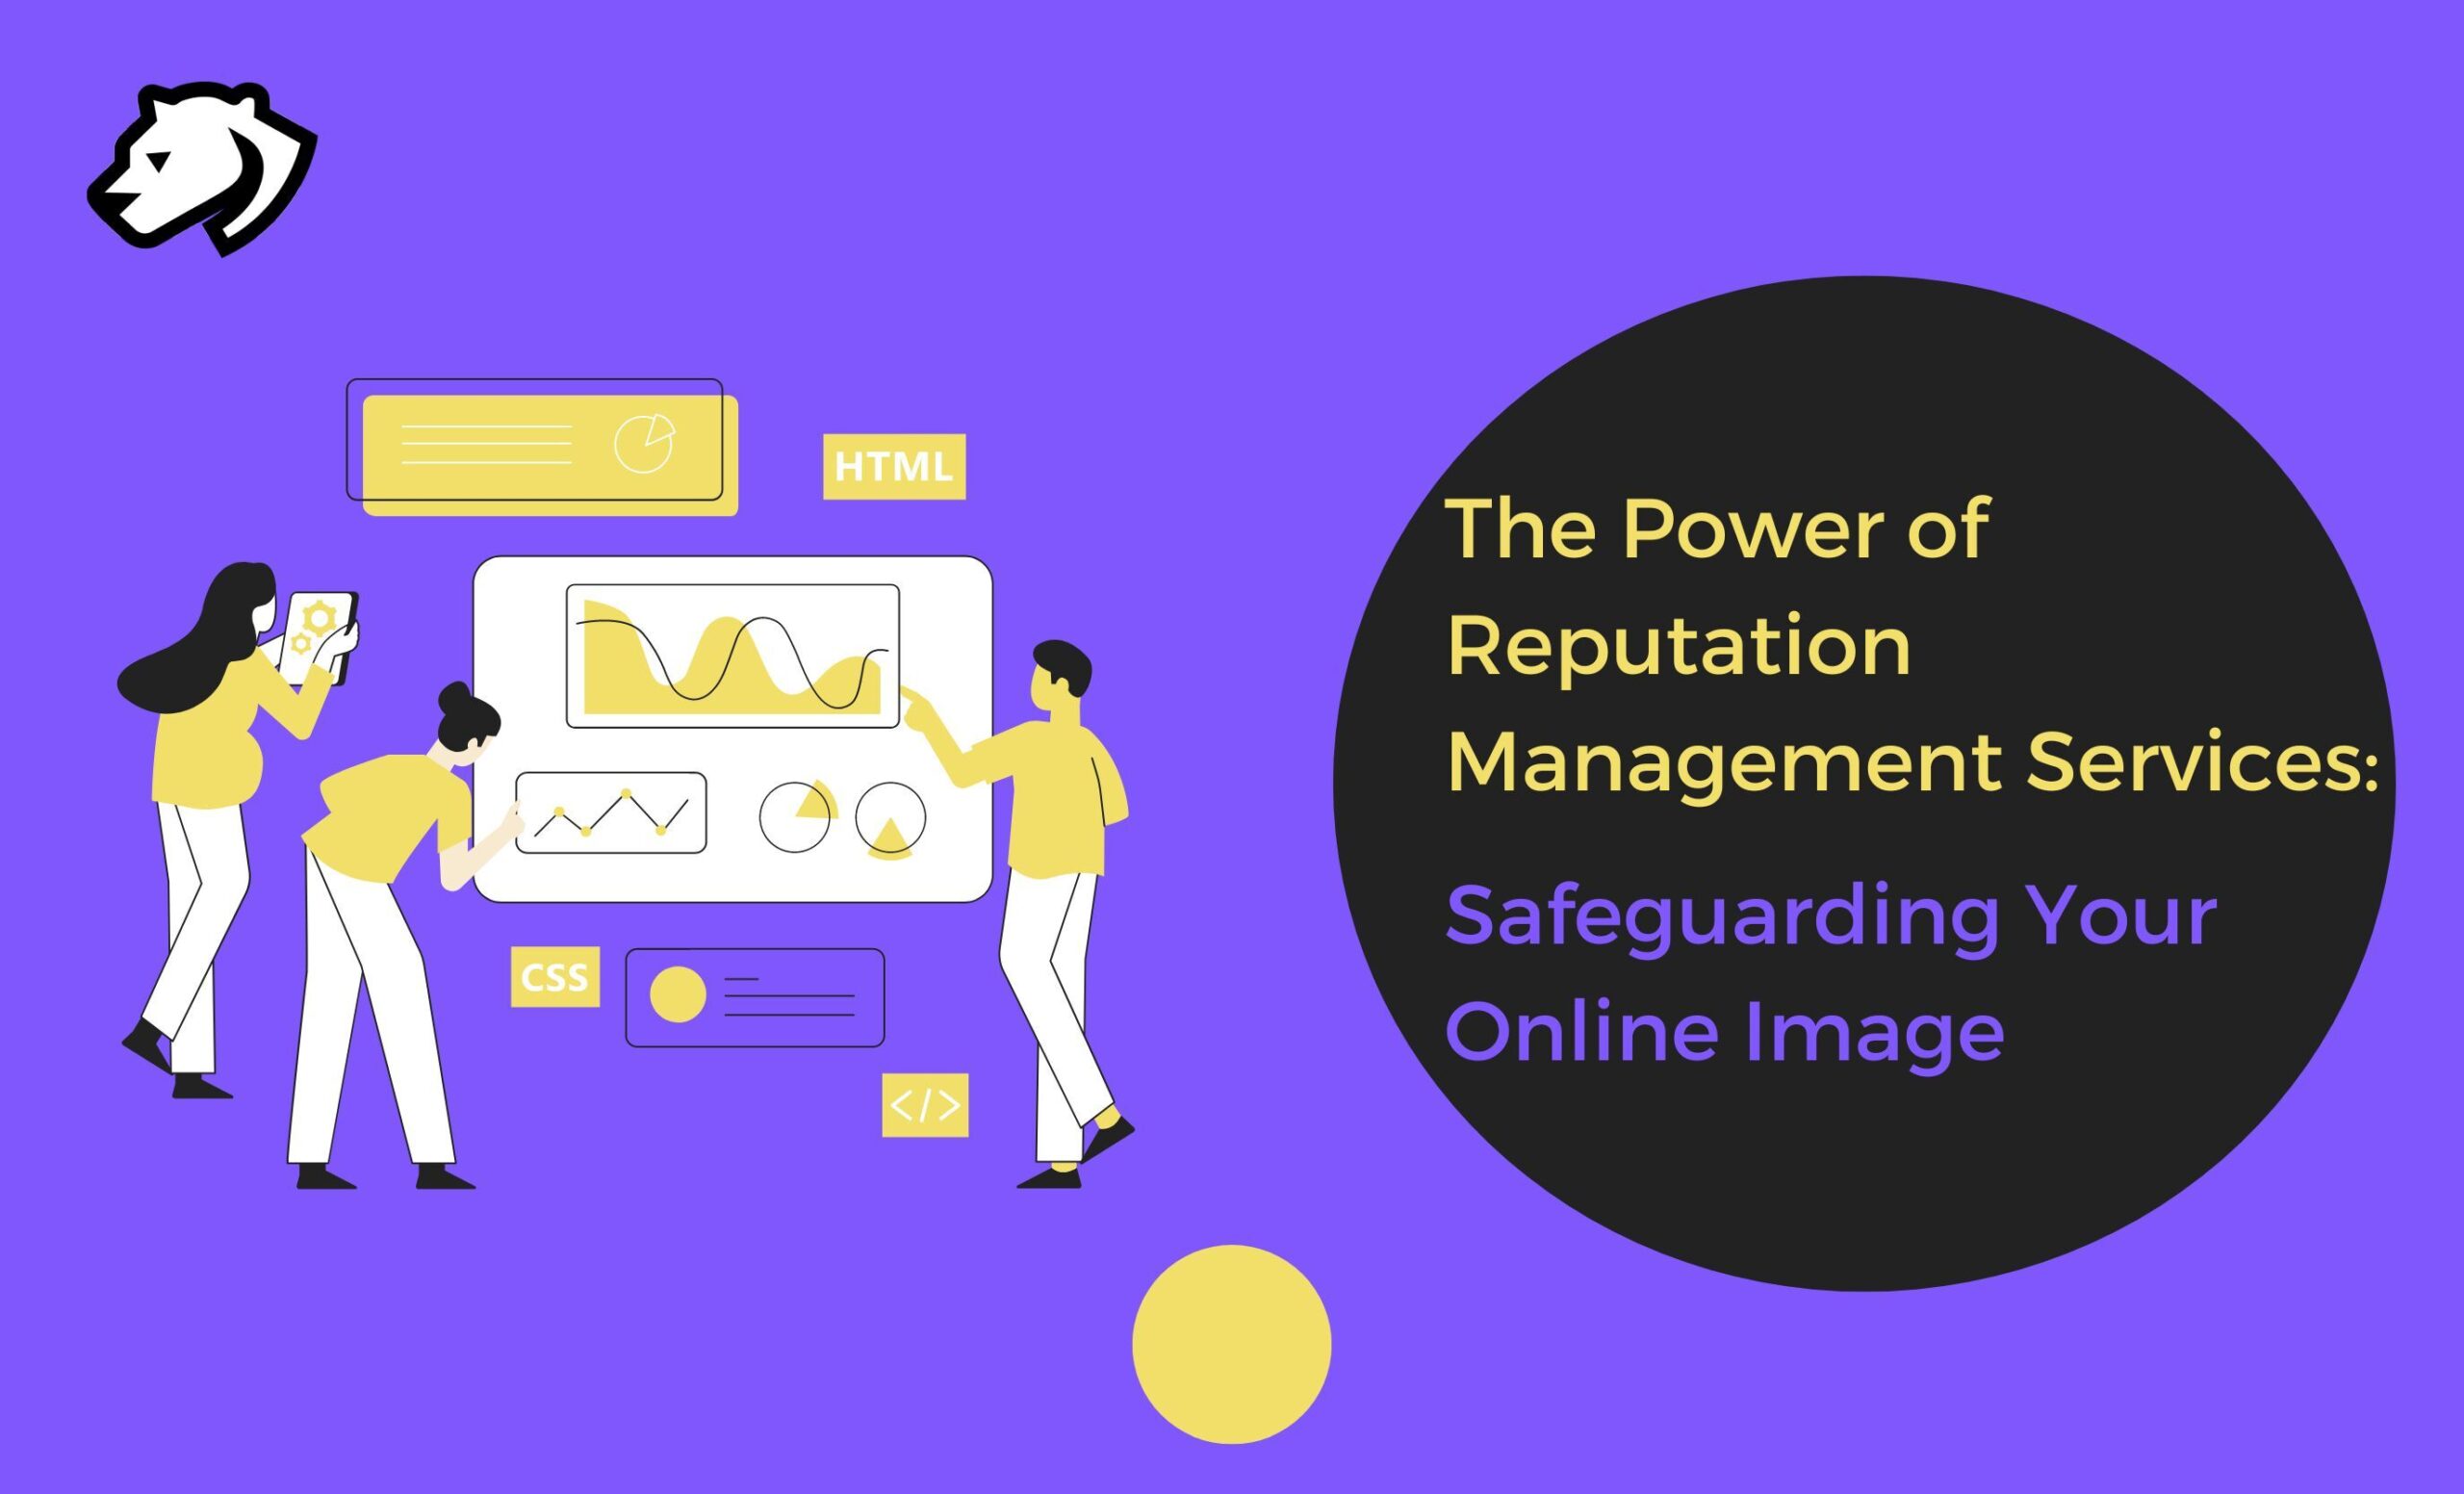 The Power of Reputation Management Services Safeguarding Your Online Image